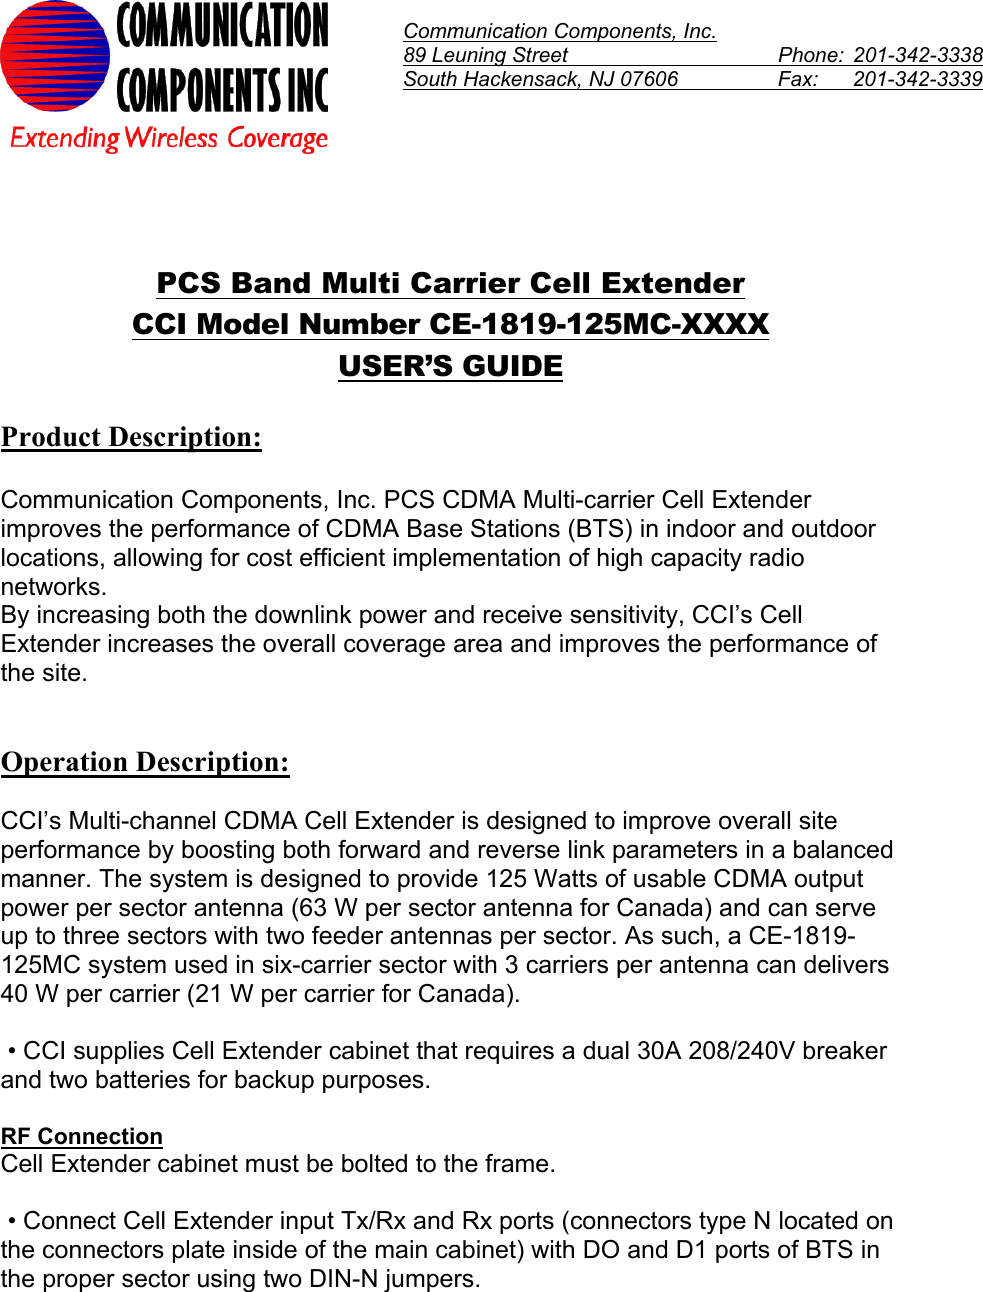  Communication Components, Inc. 89 Leuning Street    Phone:  201-342-3338South Hackensack, NJ 07606    Fax:   201-342-3339    PCS Band Multi Carrier Cell Extender CCI Model Number CE-1819-125MC-XXXX USER’S GUIDE  Product Description:  Communication Components, Inc. PCS CDMA Multi-carrier Cell Extender improves the performance of CDMA Base Stations (BTS) in indoor and outdoor locations, allowing for cost efficient implementation of high capacity radio networks. By increasing both the downlink power and receive sensitivity, CCI’s Cell Extender increases the overall coverage area and improves the performance of the site.    Operation Description:  CCI’s Multi-channel CDMA Cell Extender is designed to improve overall site performance by boosting both forward and reverse link parameters in a balanced manner. The system is designed to provide 125 Watts of usable CDMA output power per sector antenna (63 W per sector antenna for Canada) and can serve up to three sectors with two feeder antennas per sector. As such, a CE-1819-125MC system used in six-carrier sector with 3 carriers per antenna can delivers 40 W per carrier (21 W per carrier for Canada).   • CCI supplies Cell Extender cabinet that requires a dual 30A 208/240V breaker and two batteries for backup purposes.   RF Connection Cell Extender cabinet must be bolted to the frame.   • Connect Cell Extender input Tx/Rx and Rx ports (connectors type N located on the connectors plate inside of the main cabinet) with DO and D1 ports of BTS in the proper sector using two DIN-N jumpers.  